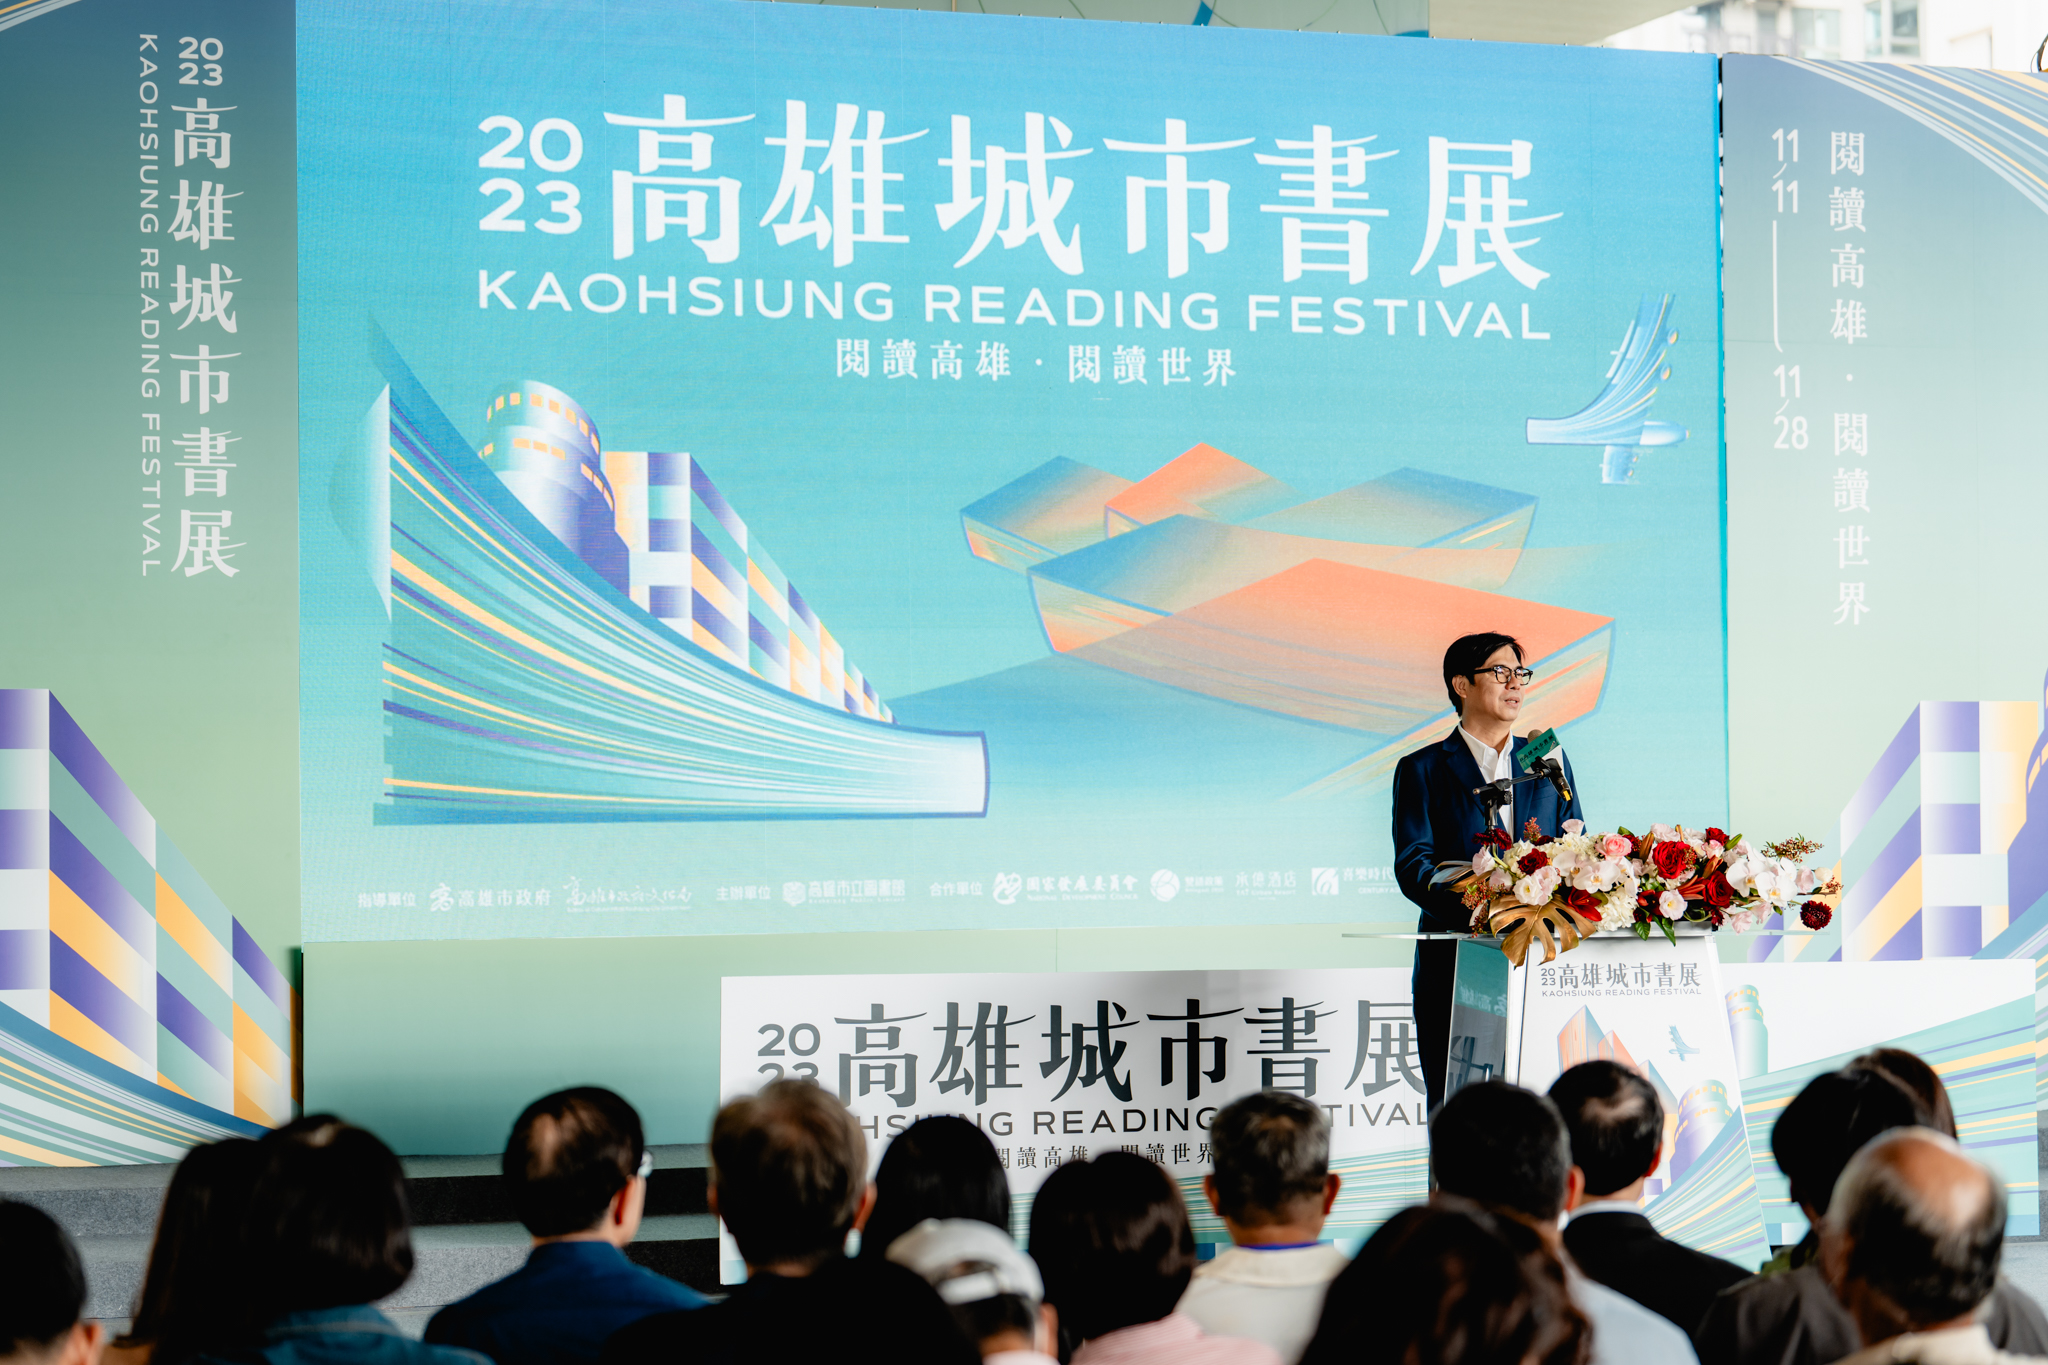 Kaohsiung Mayor Chen Chi-Mai attended the opening of the 2023 Kaohsiung Reading Festival today (November 11th) at the Kaohsiung Municipal Library Main Branch.